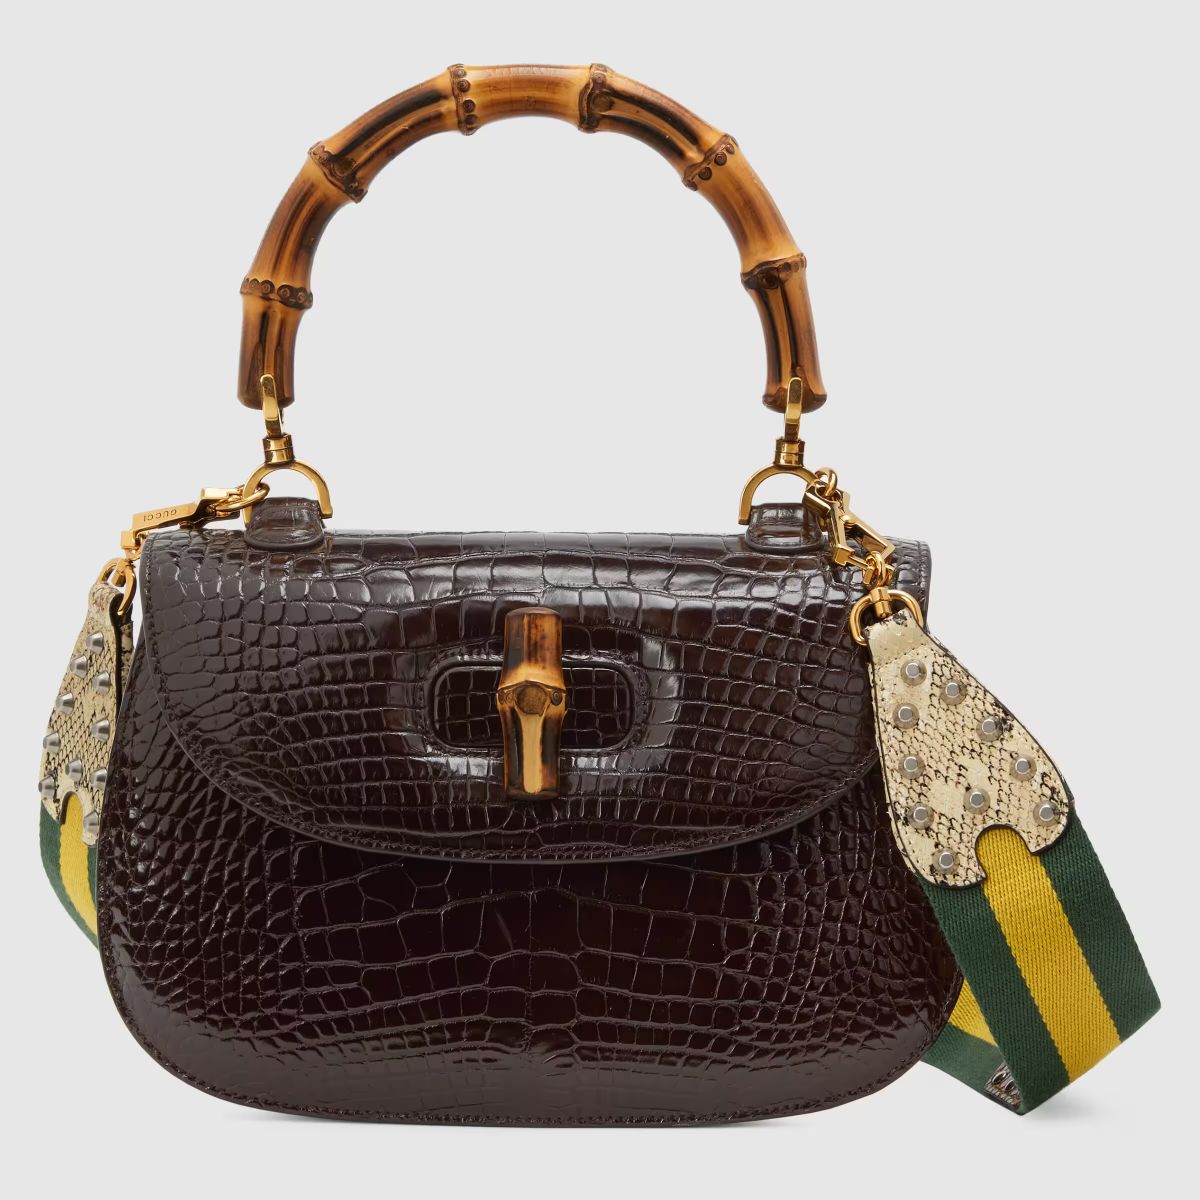 Gucci Bamboo 1947 Bag: Meet The Newest Gucci Bag & Learn Its History –  StyleCaster